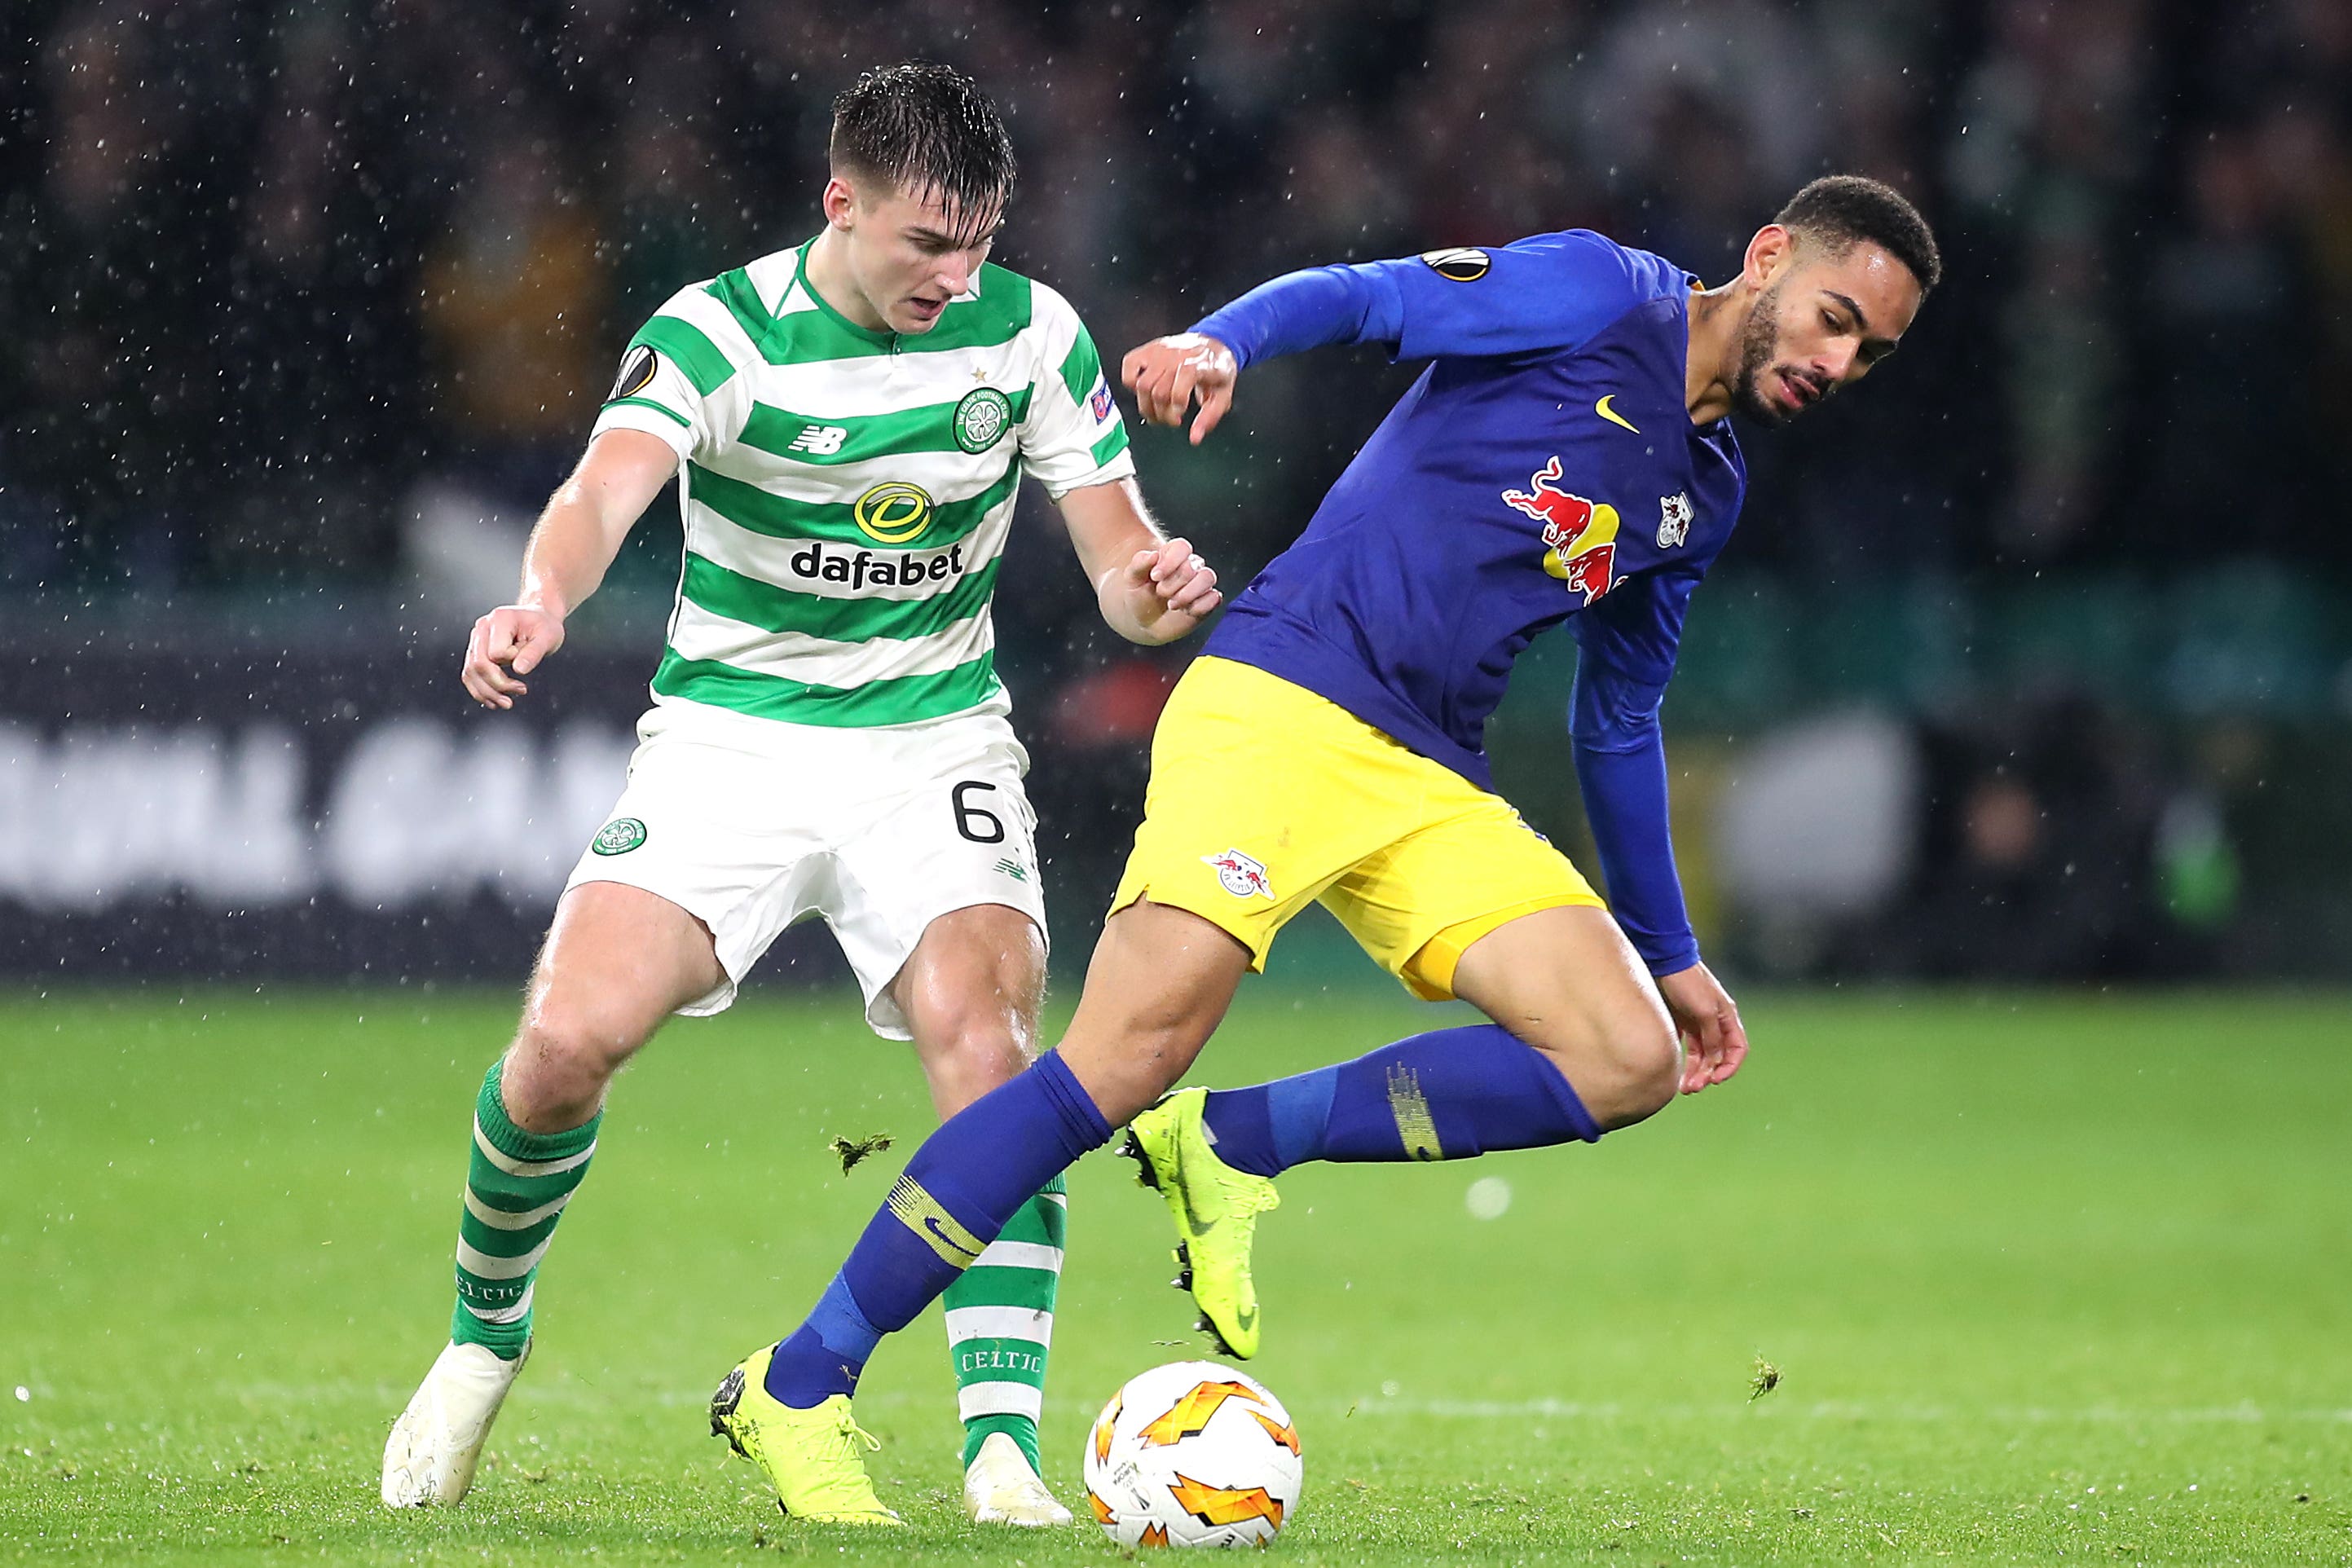 Celtic’s Kieran Tierney (left) and RB Leipzig’ Matheus Cunha battle for the ball during the UEFA Europa League, Group B match at Celtic Park, Glasgow.